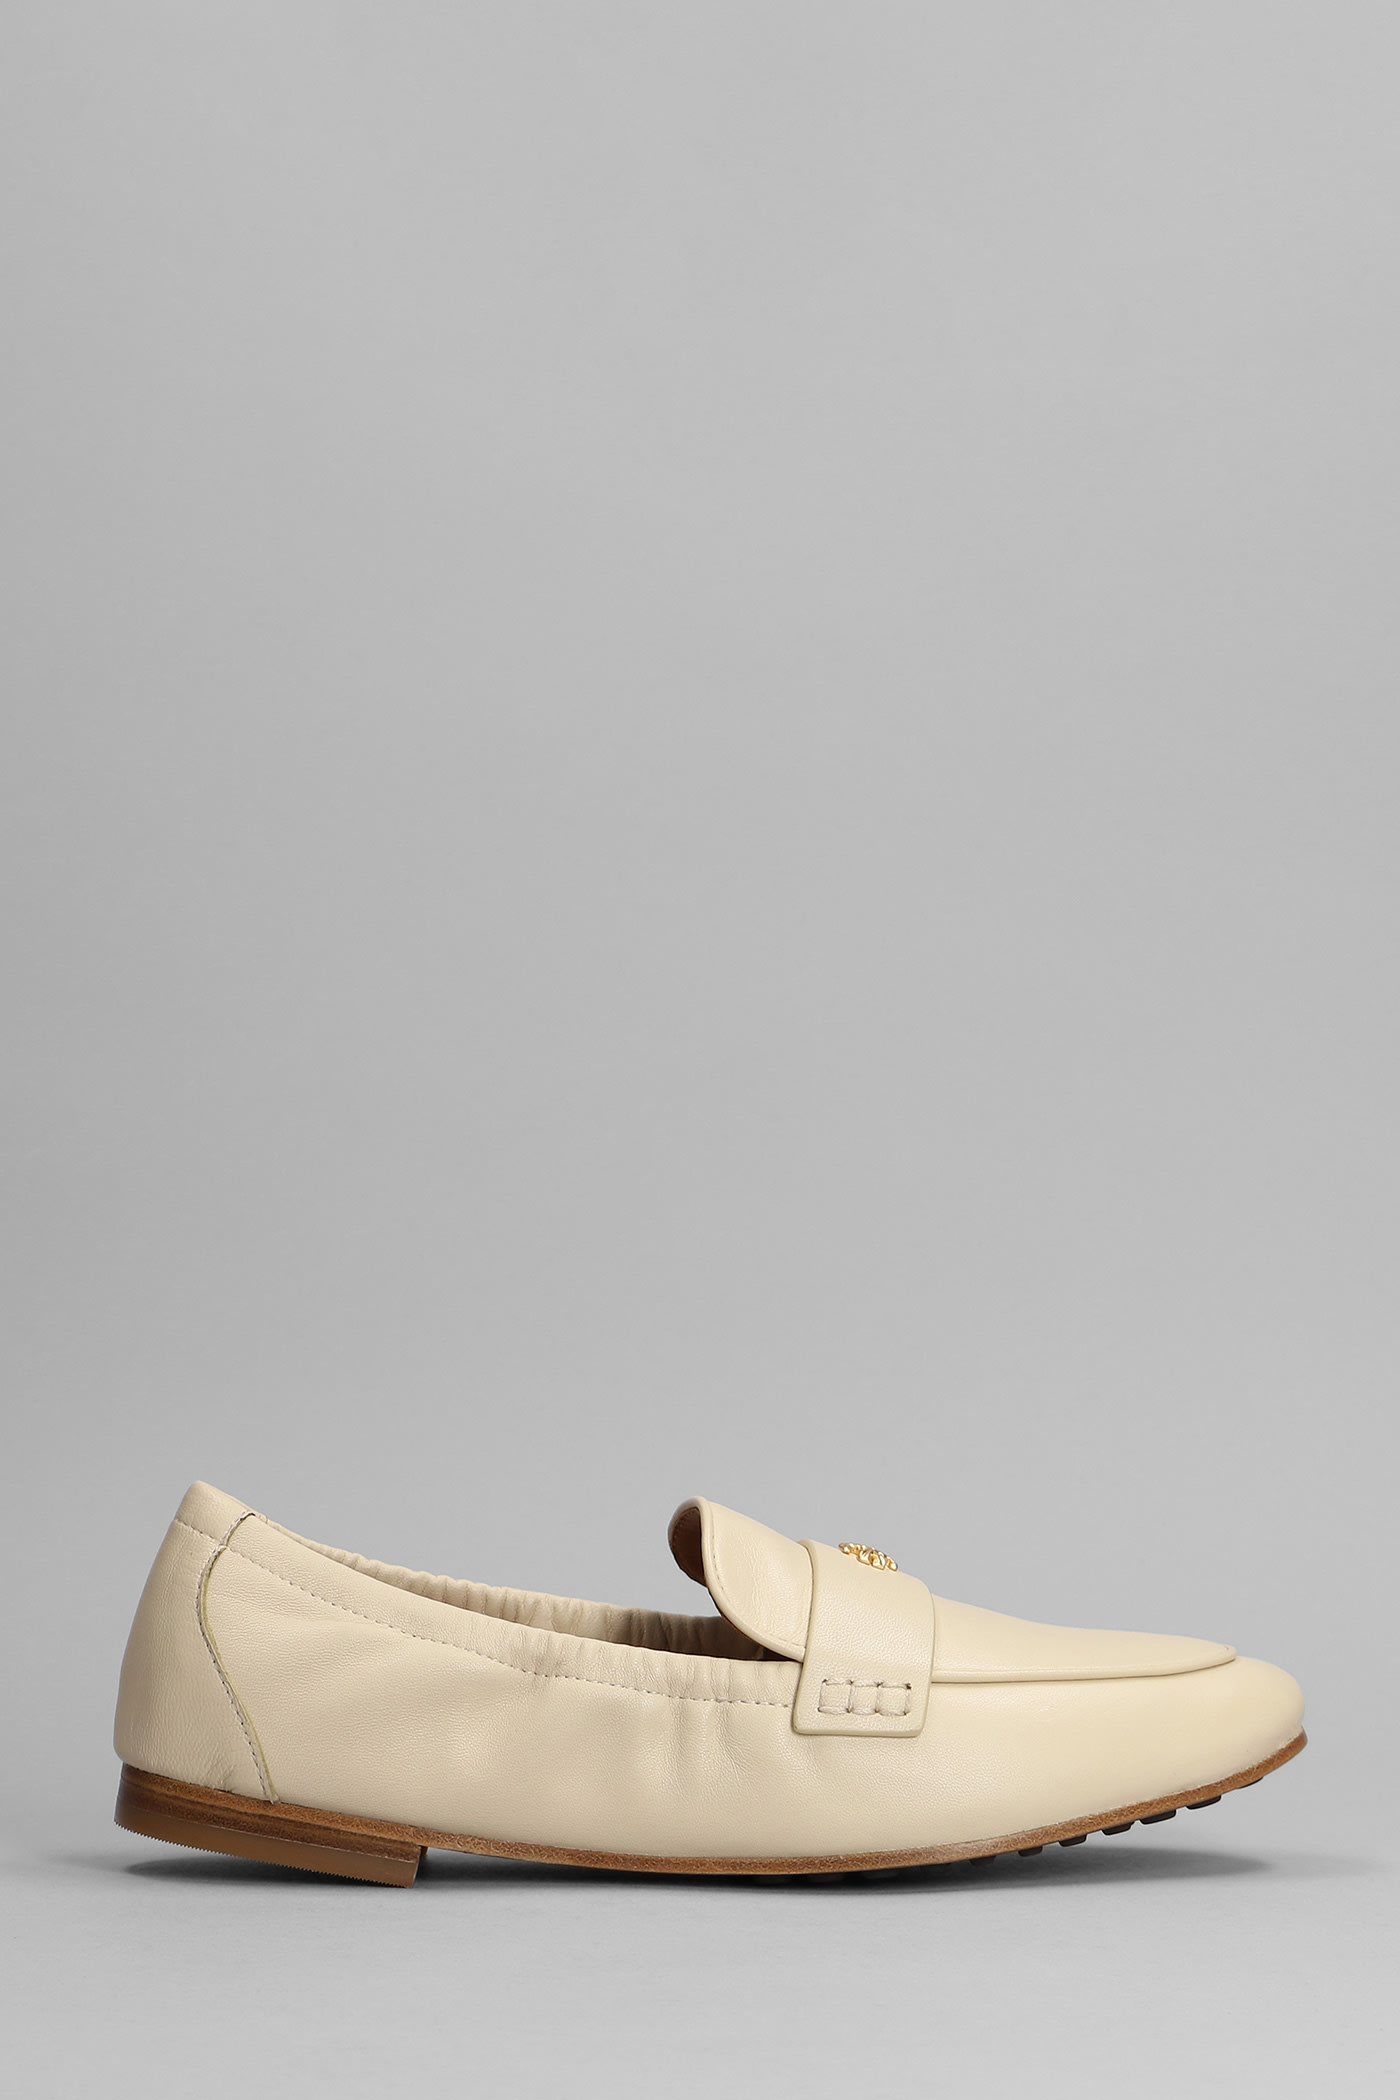 TORY BURCH LOAFERS IN BEIGE LEATHER